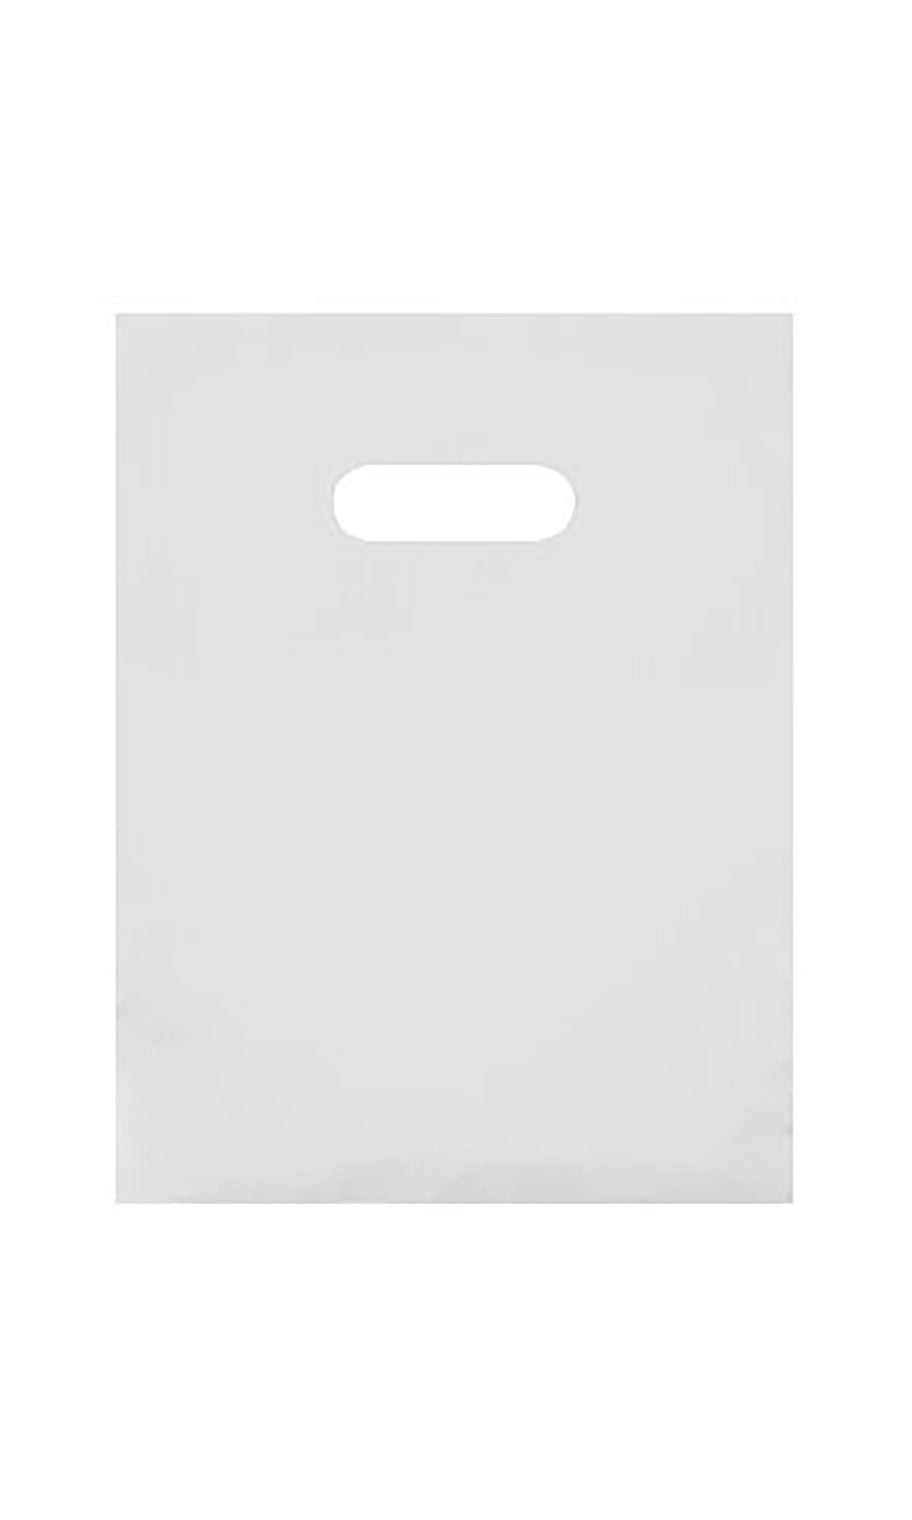 Black Cat Avenue Premium Heavy Duty Glossy Plastic Merchandise Bags with Handle 100-Pack 12x15,Lime 12x15 No Gusset 